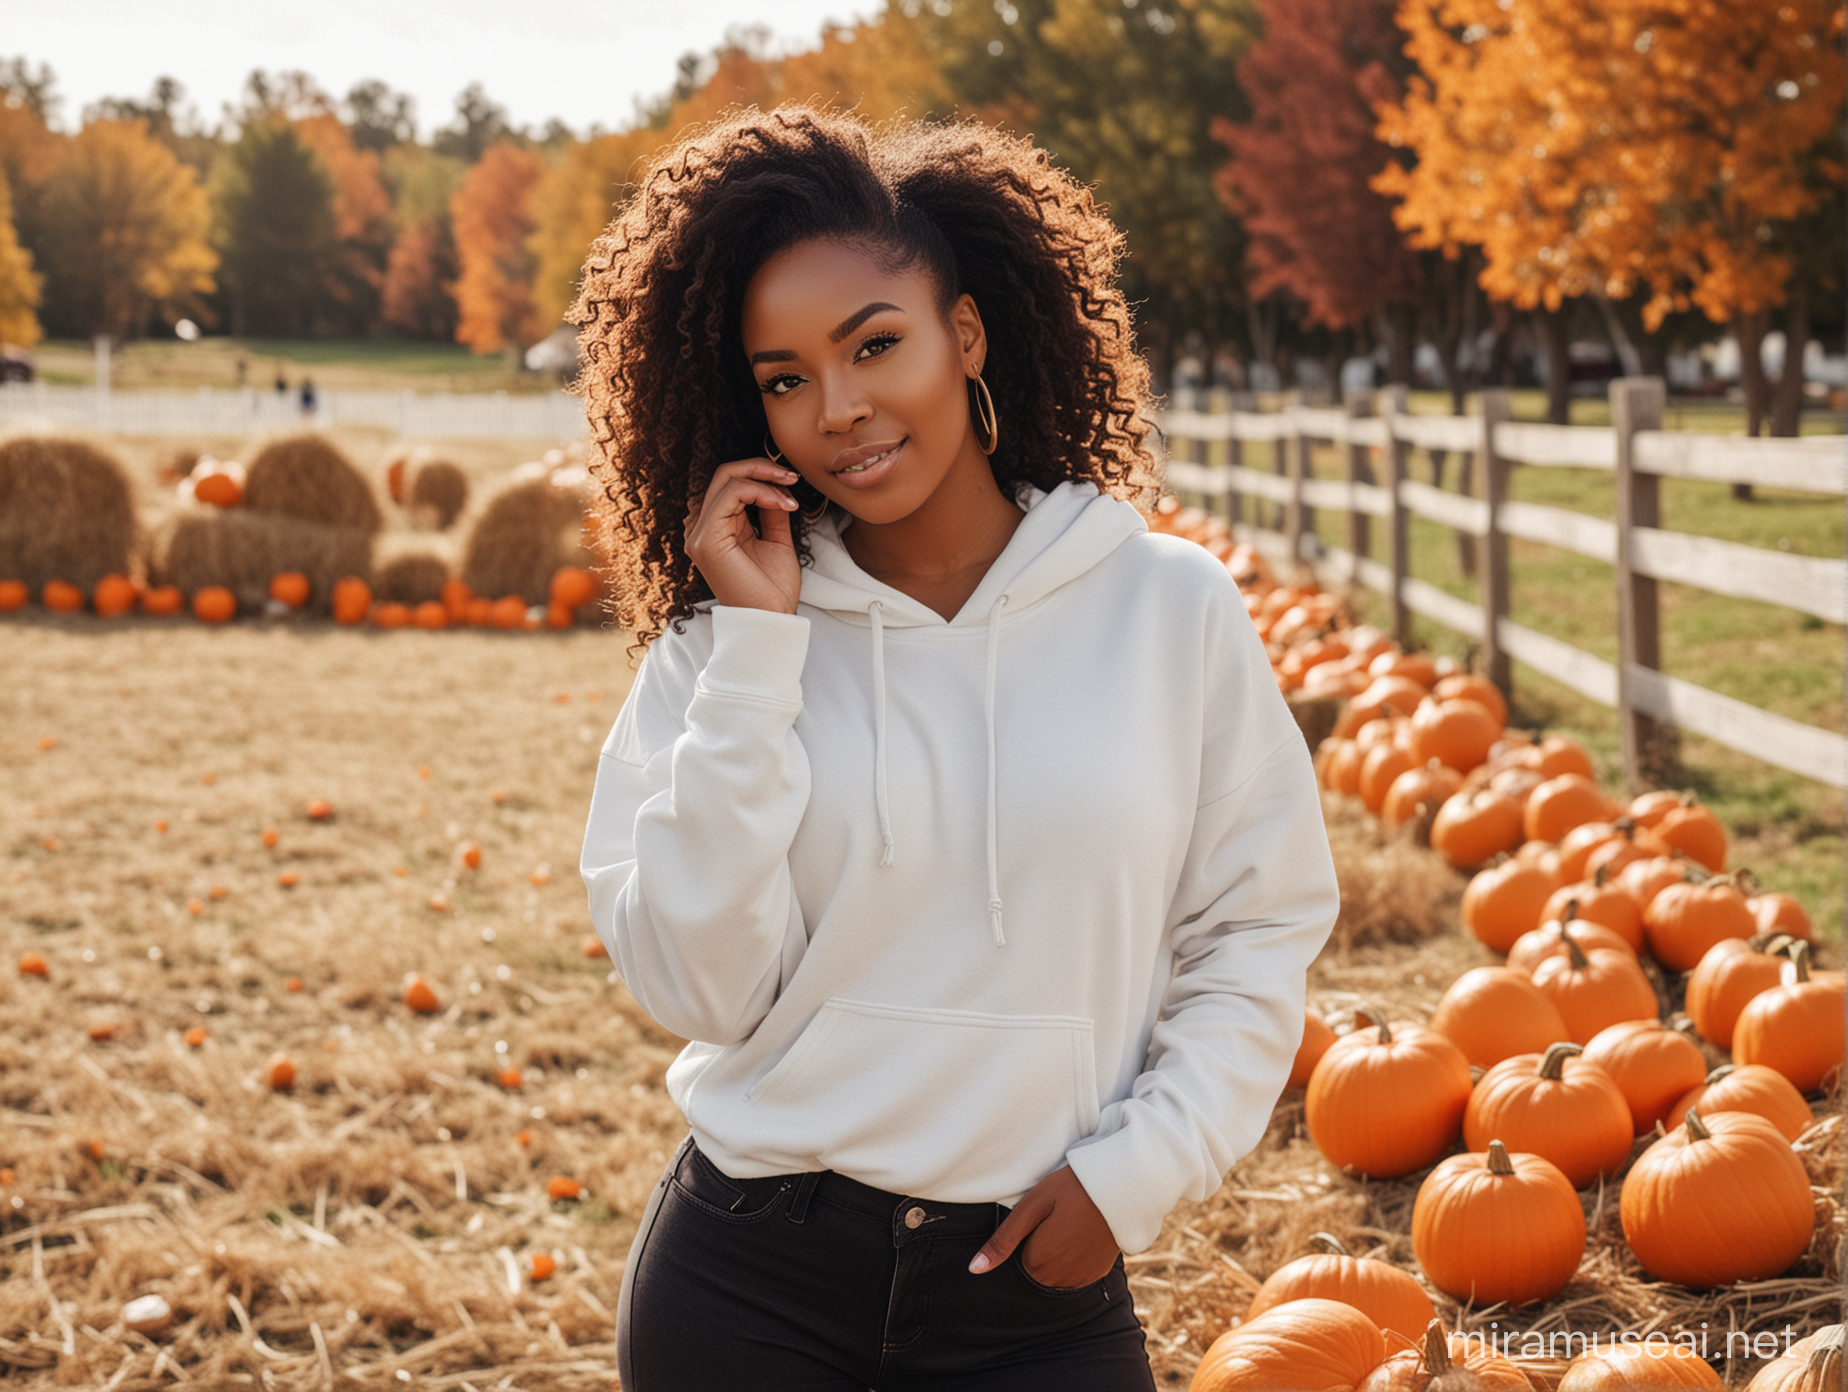 Beautiful Black Woman in White Hoodie and Black Jeans at Pumpkin Patch